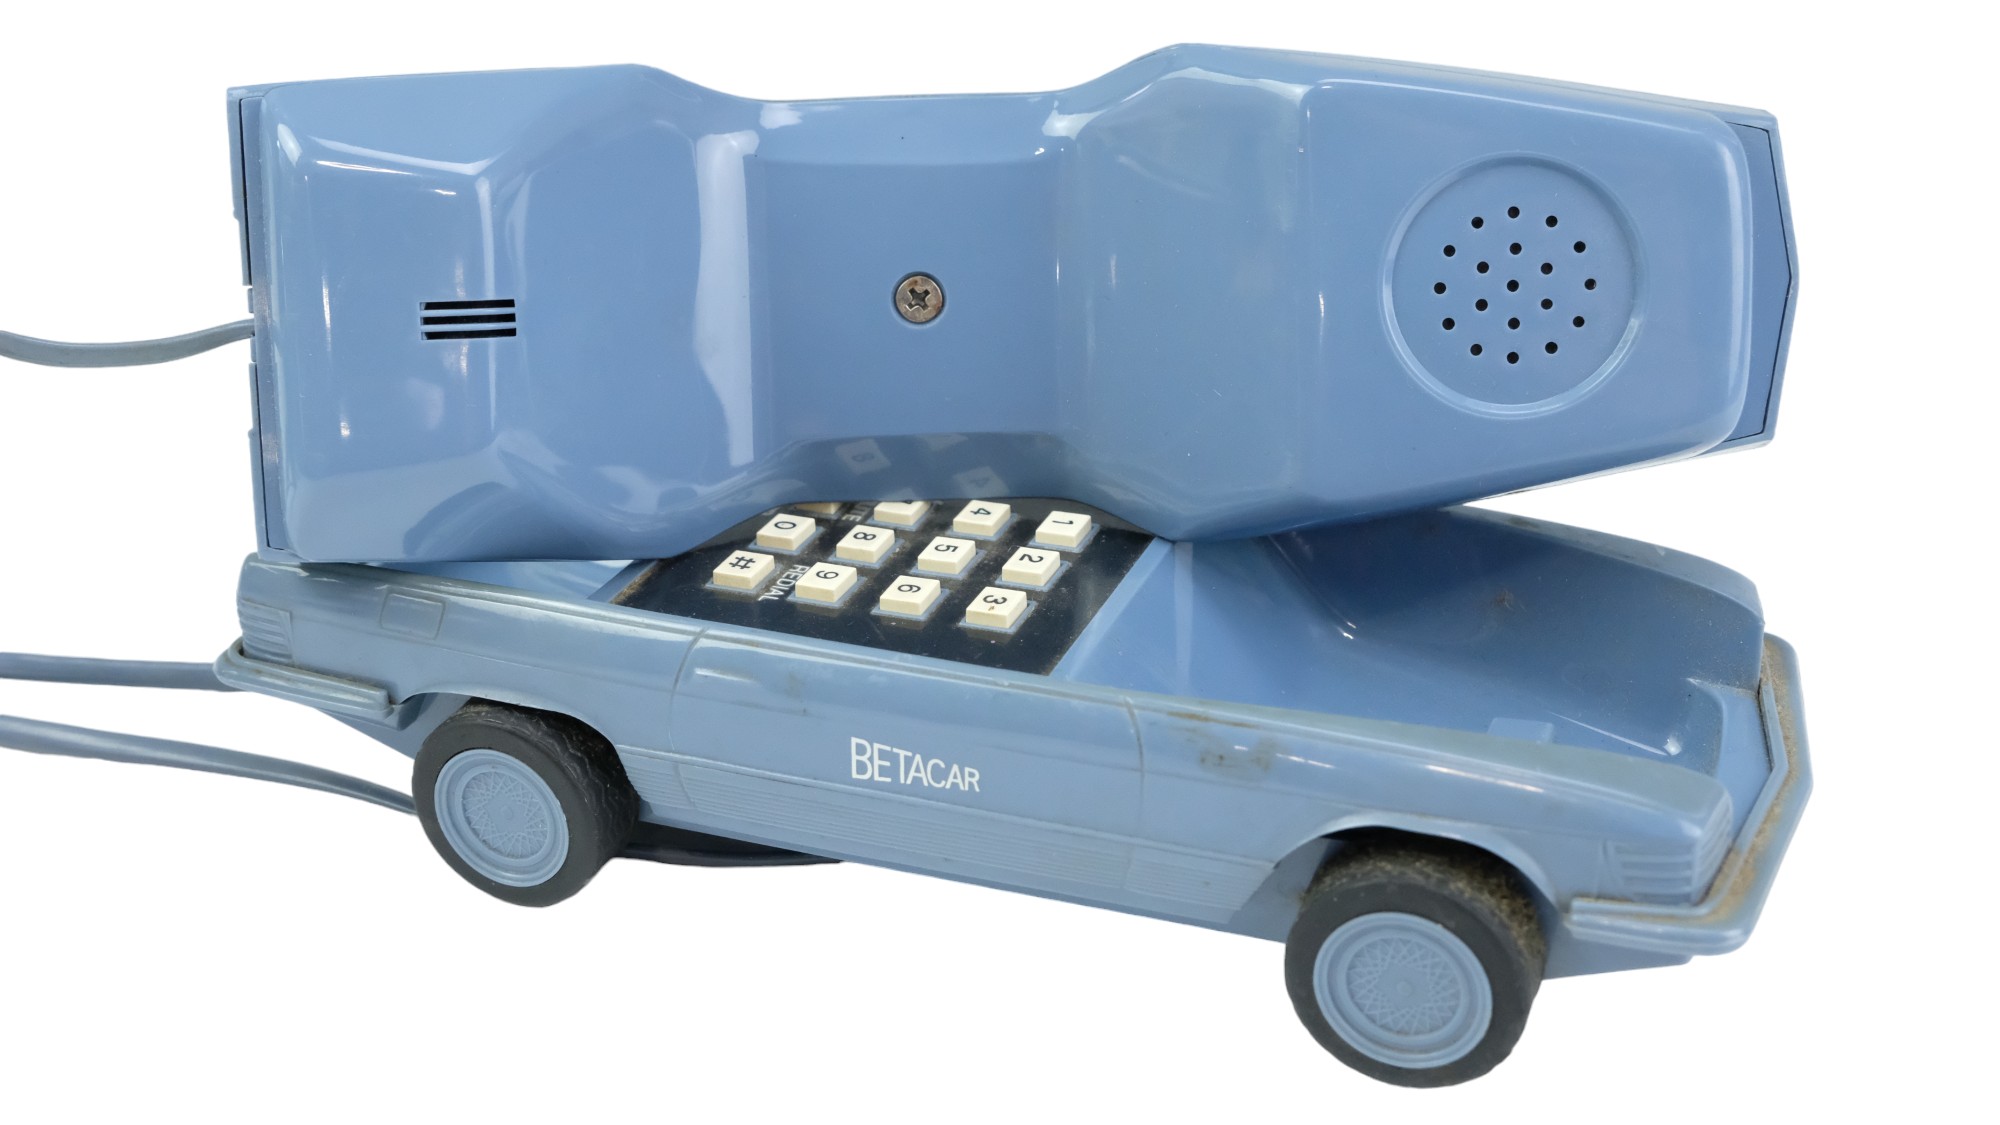 A 1980s Betacom Betacar novelty telephone modelled as a car, 22 x 9.5 x 7 cm - Image 2 of 5